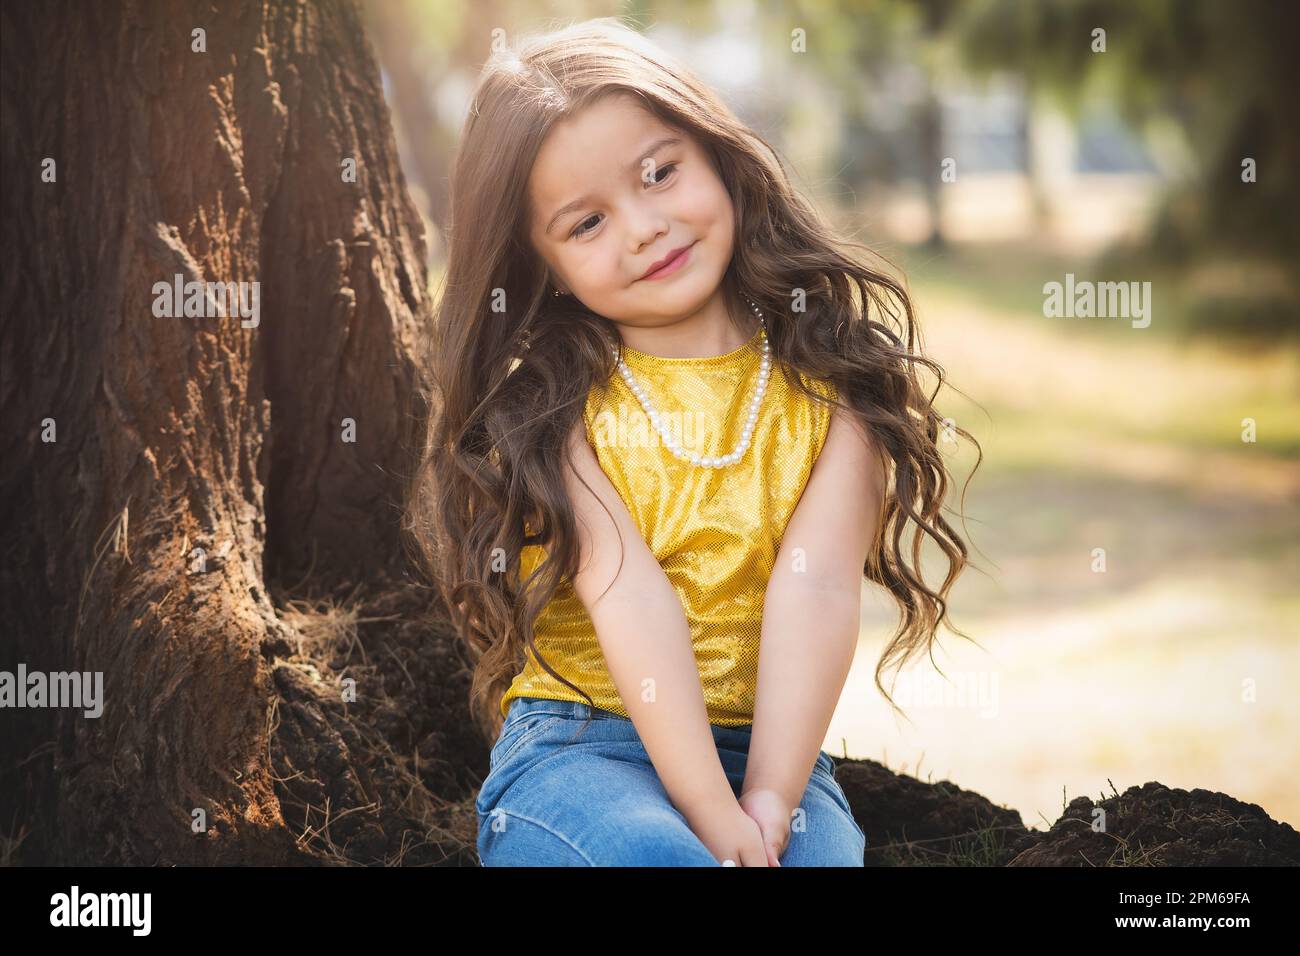 Blonde preschool girl sitting in a tree has a happy time in nature, cute smile. children's day theme. Stock Photo